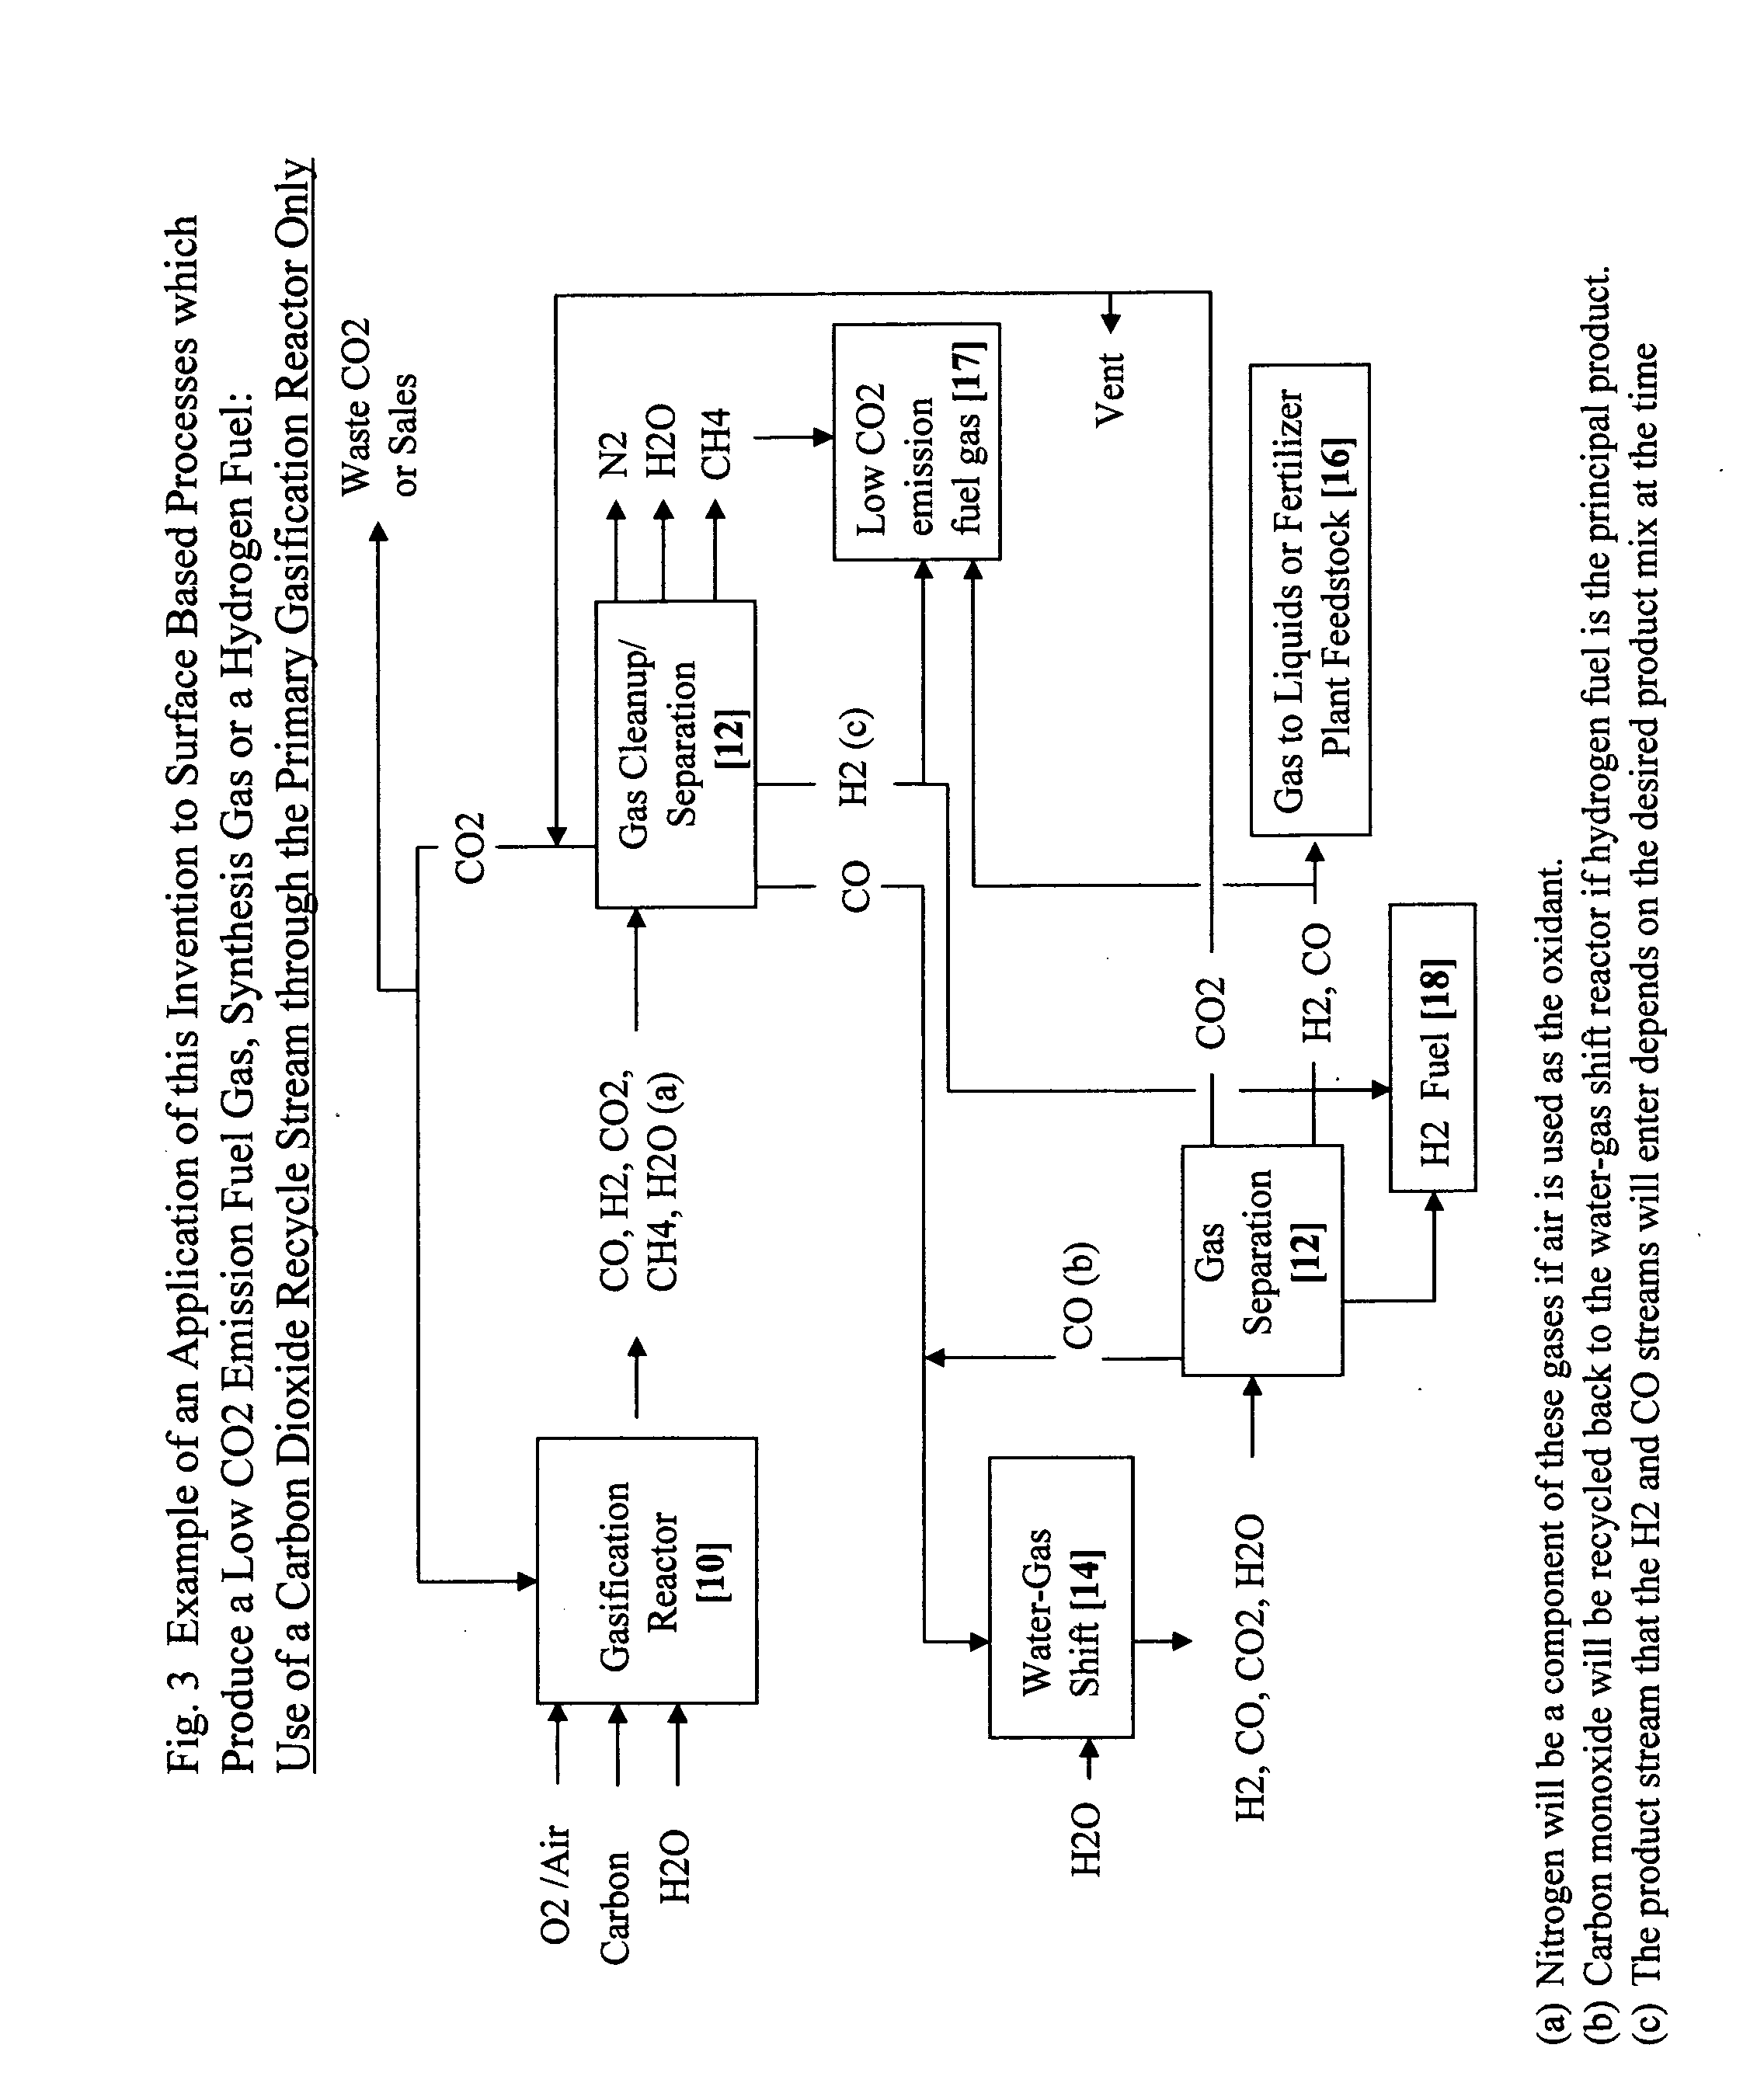 Method for reducing carbon dioxide emissions and water contamination potential while increasing product yields from carbon gasification and energy production processes